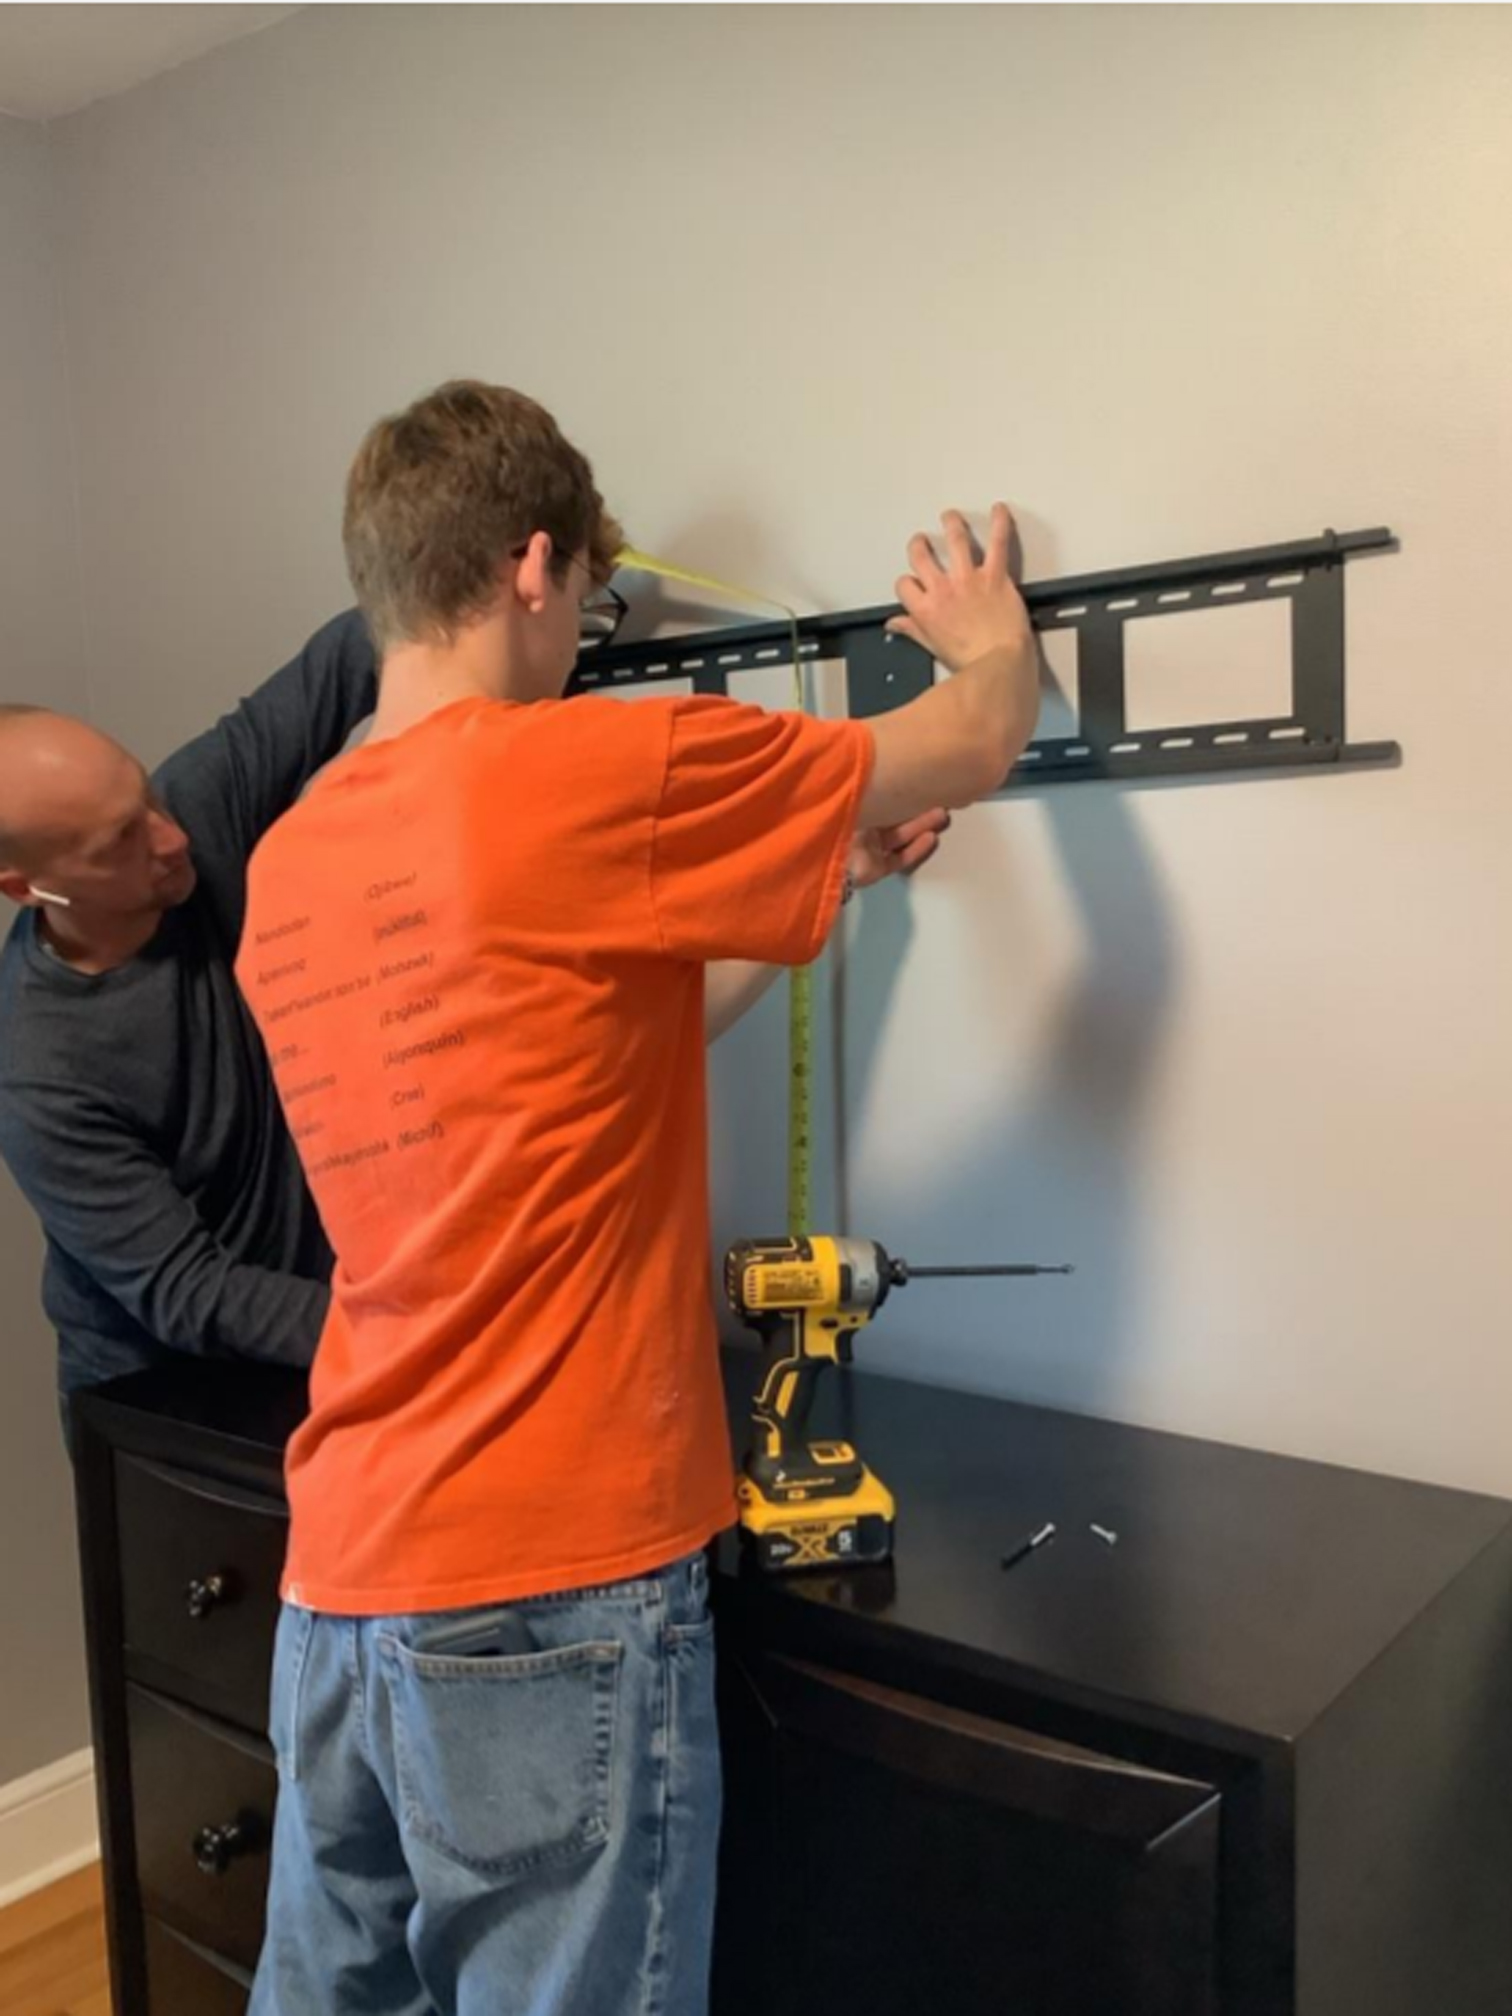 Student hanging a bracket on the wall